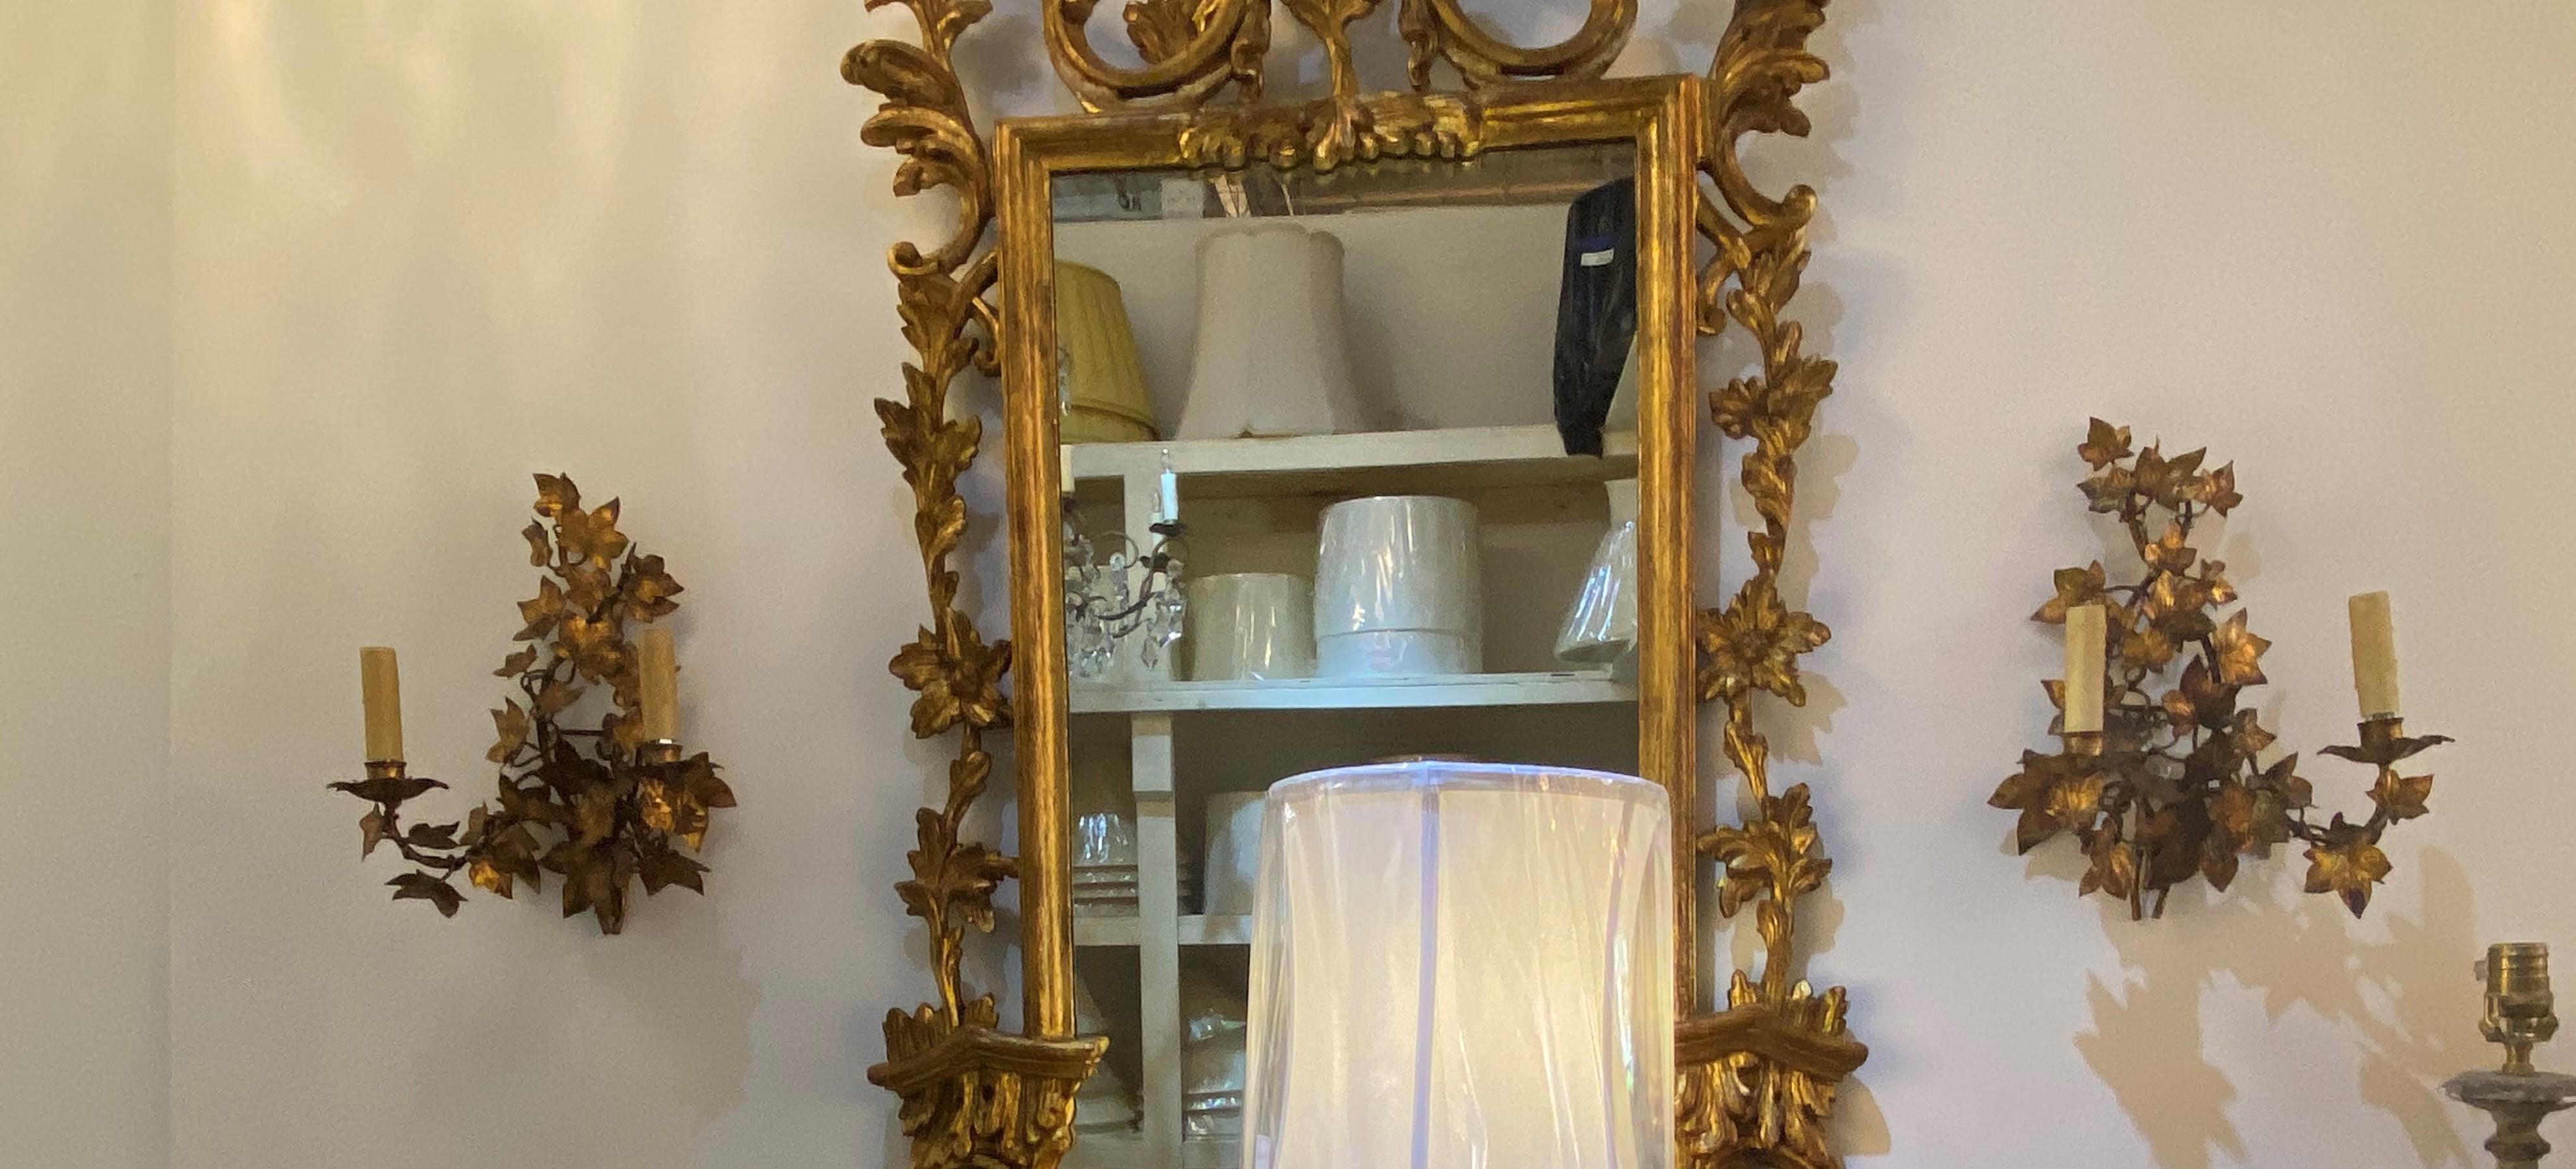 Pair of Gilt Gold Sconces In Excellent Condition For Sale In Dallas, TX